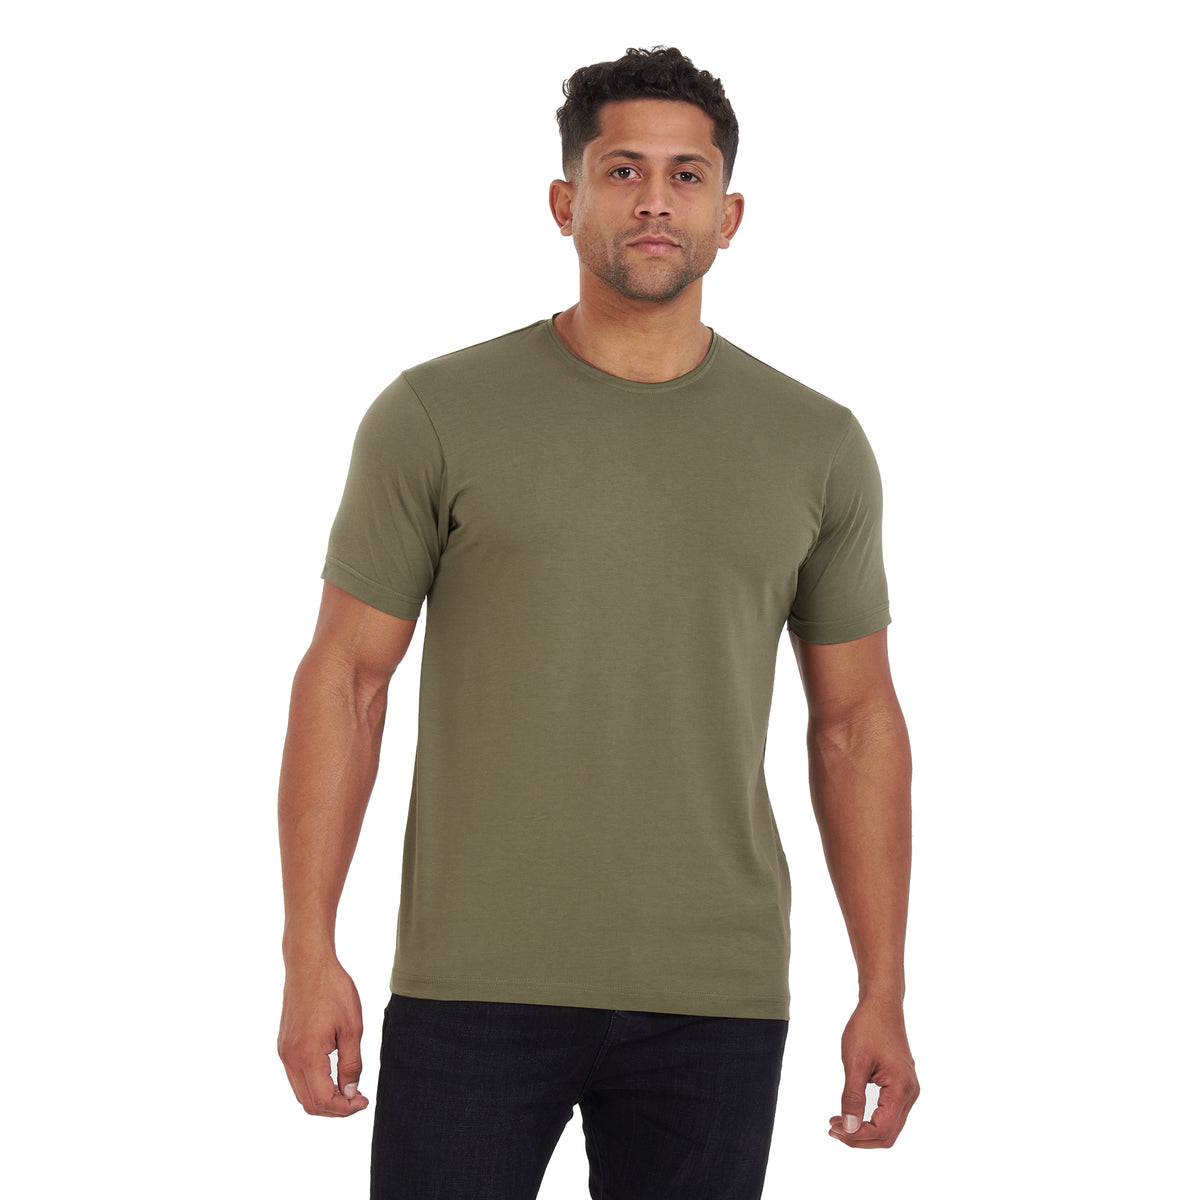 Olive Torned T-shirt – ODZ outfit